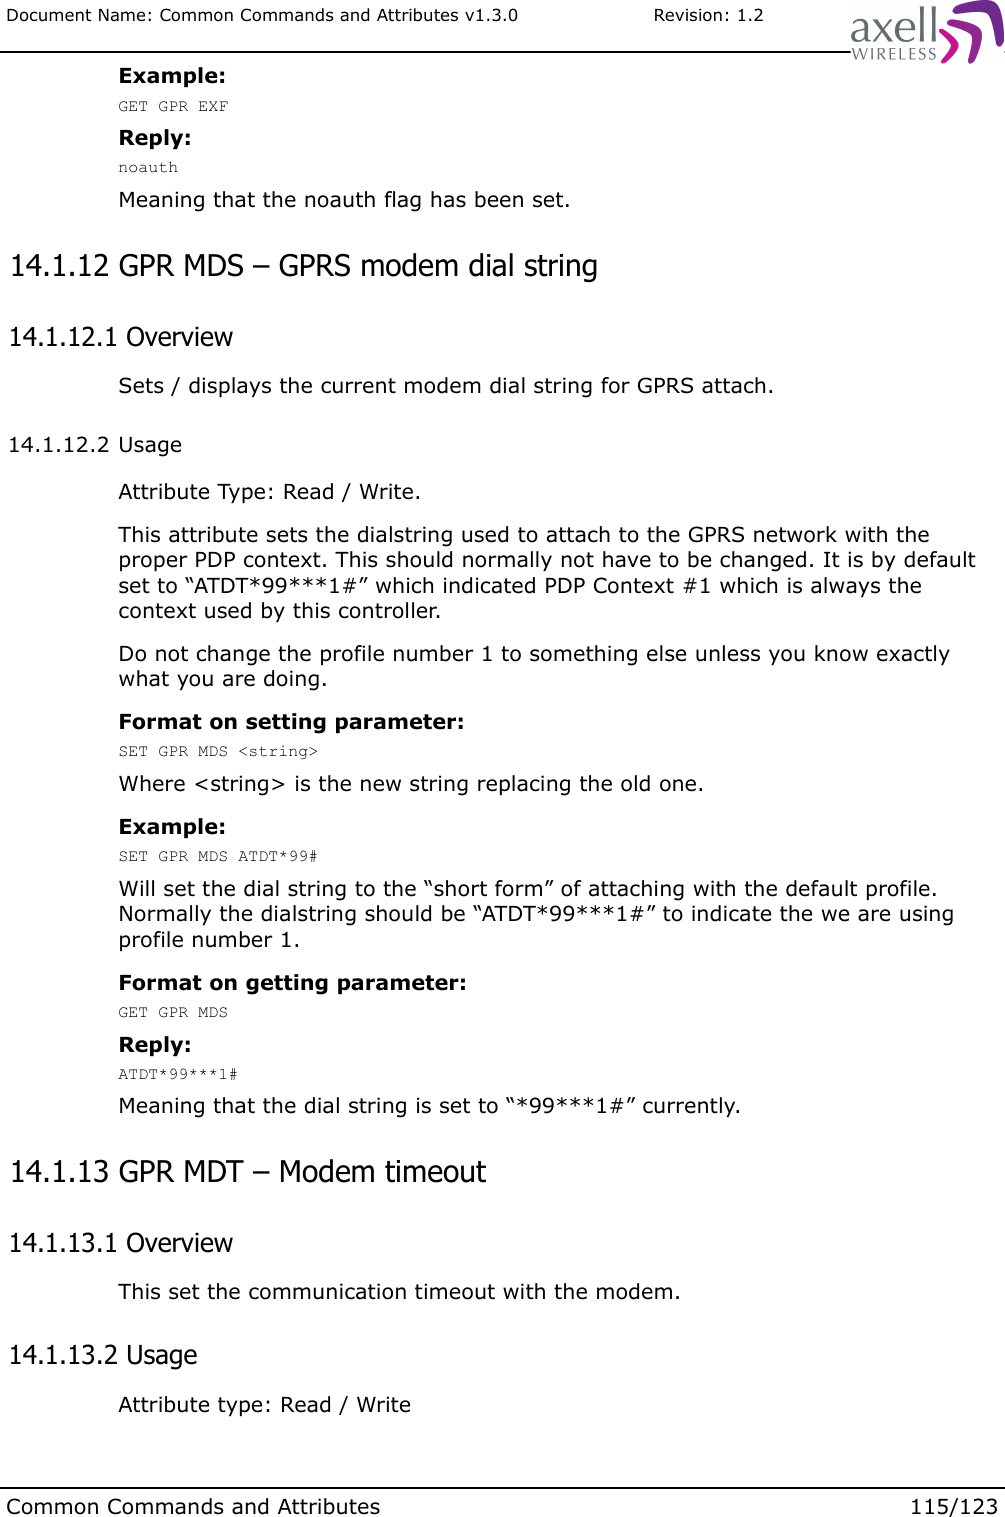 Document Name: Common Commands and Attributes v1.3.0                       Revision: 1.2Example:GET GPR EXFReply:noauthMeaning that the noauth flag has been set. 14.1.12 GPR MDS – GPRS modem dial string 14.1.12.1 OverviewSets / displays the current modem dial string for GPRS attach. 14.1.12.2 UsageAttribute Type: Read / Write.This attribute sets the dialstring used to attach to the GPRS network with the proper PDP context. This should normally not have to be changed. It is by default set to “ATDT*99***1#” which indicated PDP Context #1 which is always the context used by this controller. Do not change the profile number 1 to something else unless you know exactly what you are doing.Format on setting parameter:SET GPR MDS &lt;string&gt;Where &lt;string&gt; is the new string replacing the old one.Example:SET GPR MDS ATDT*99#Will set the dial string to the “short form” of attaching with the default profile. Normally the dialstring should be “ATDT*99***1#” to indicate the we are using profile number 1.Format on getting parameter:GET GPR MDSReply:ATDT*99***1#Meaning that the dial string is set to “*99***1#” currently. 14.1.13 GPR MDT – Modem timeout 14.1.13.1 OverviewThis set the communication timeout with the modem. 14.1.13.2 UsageAttribute type: Read / WriteCommon Commands and Attributes 115/123